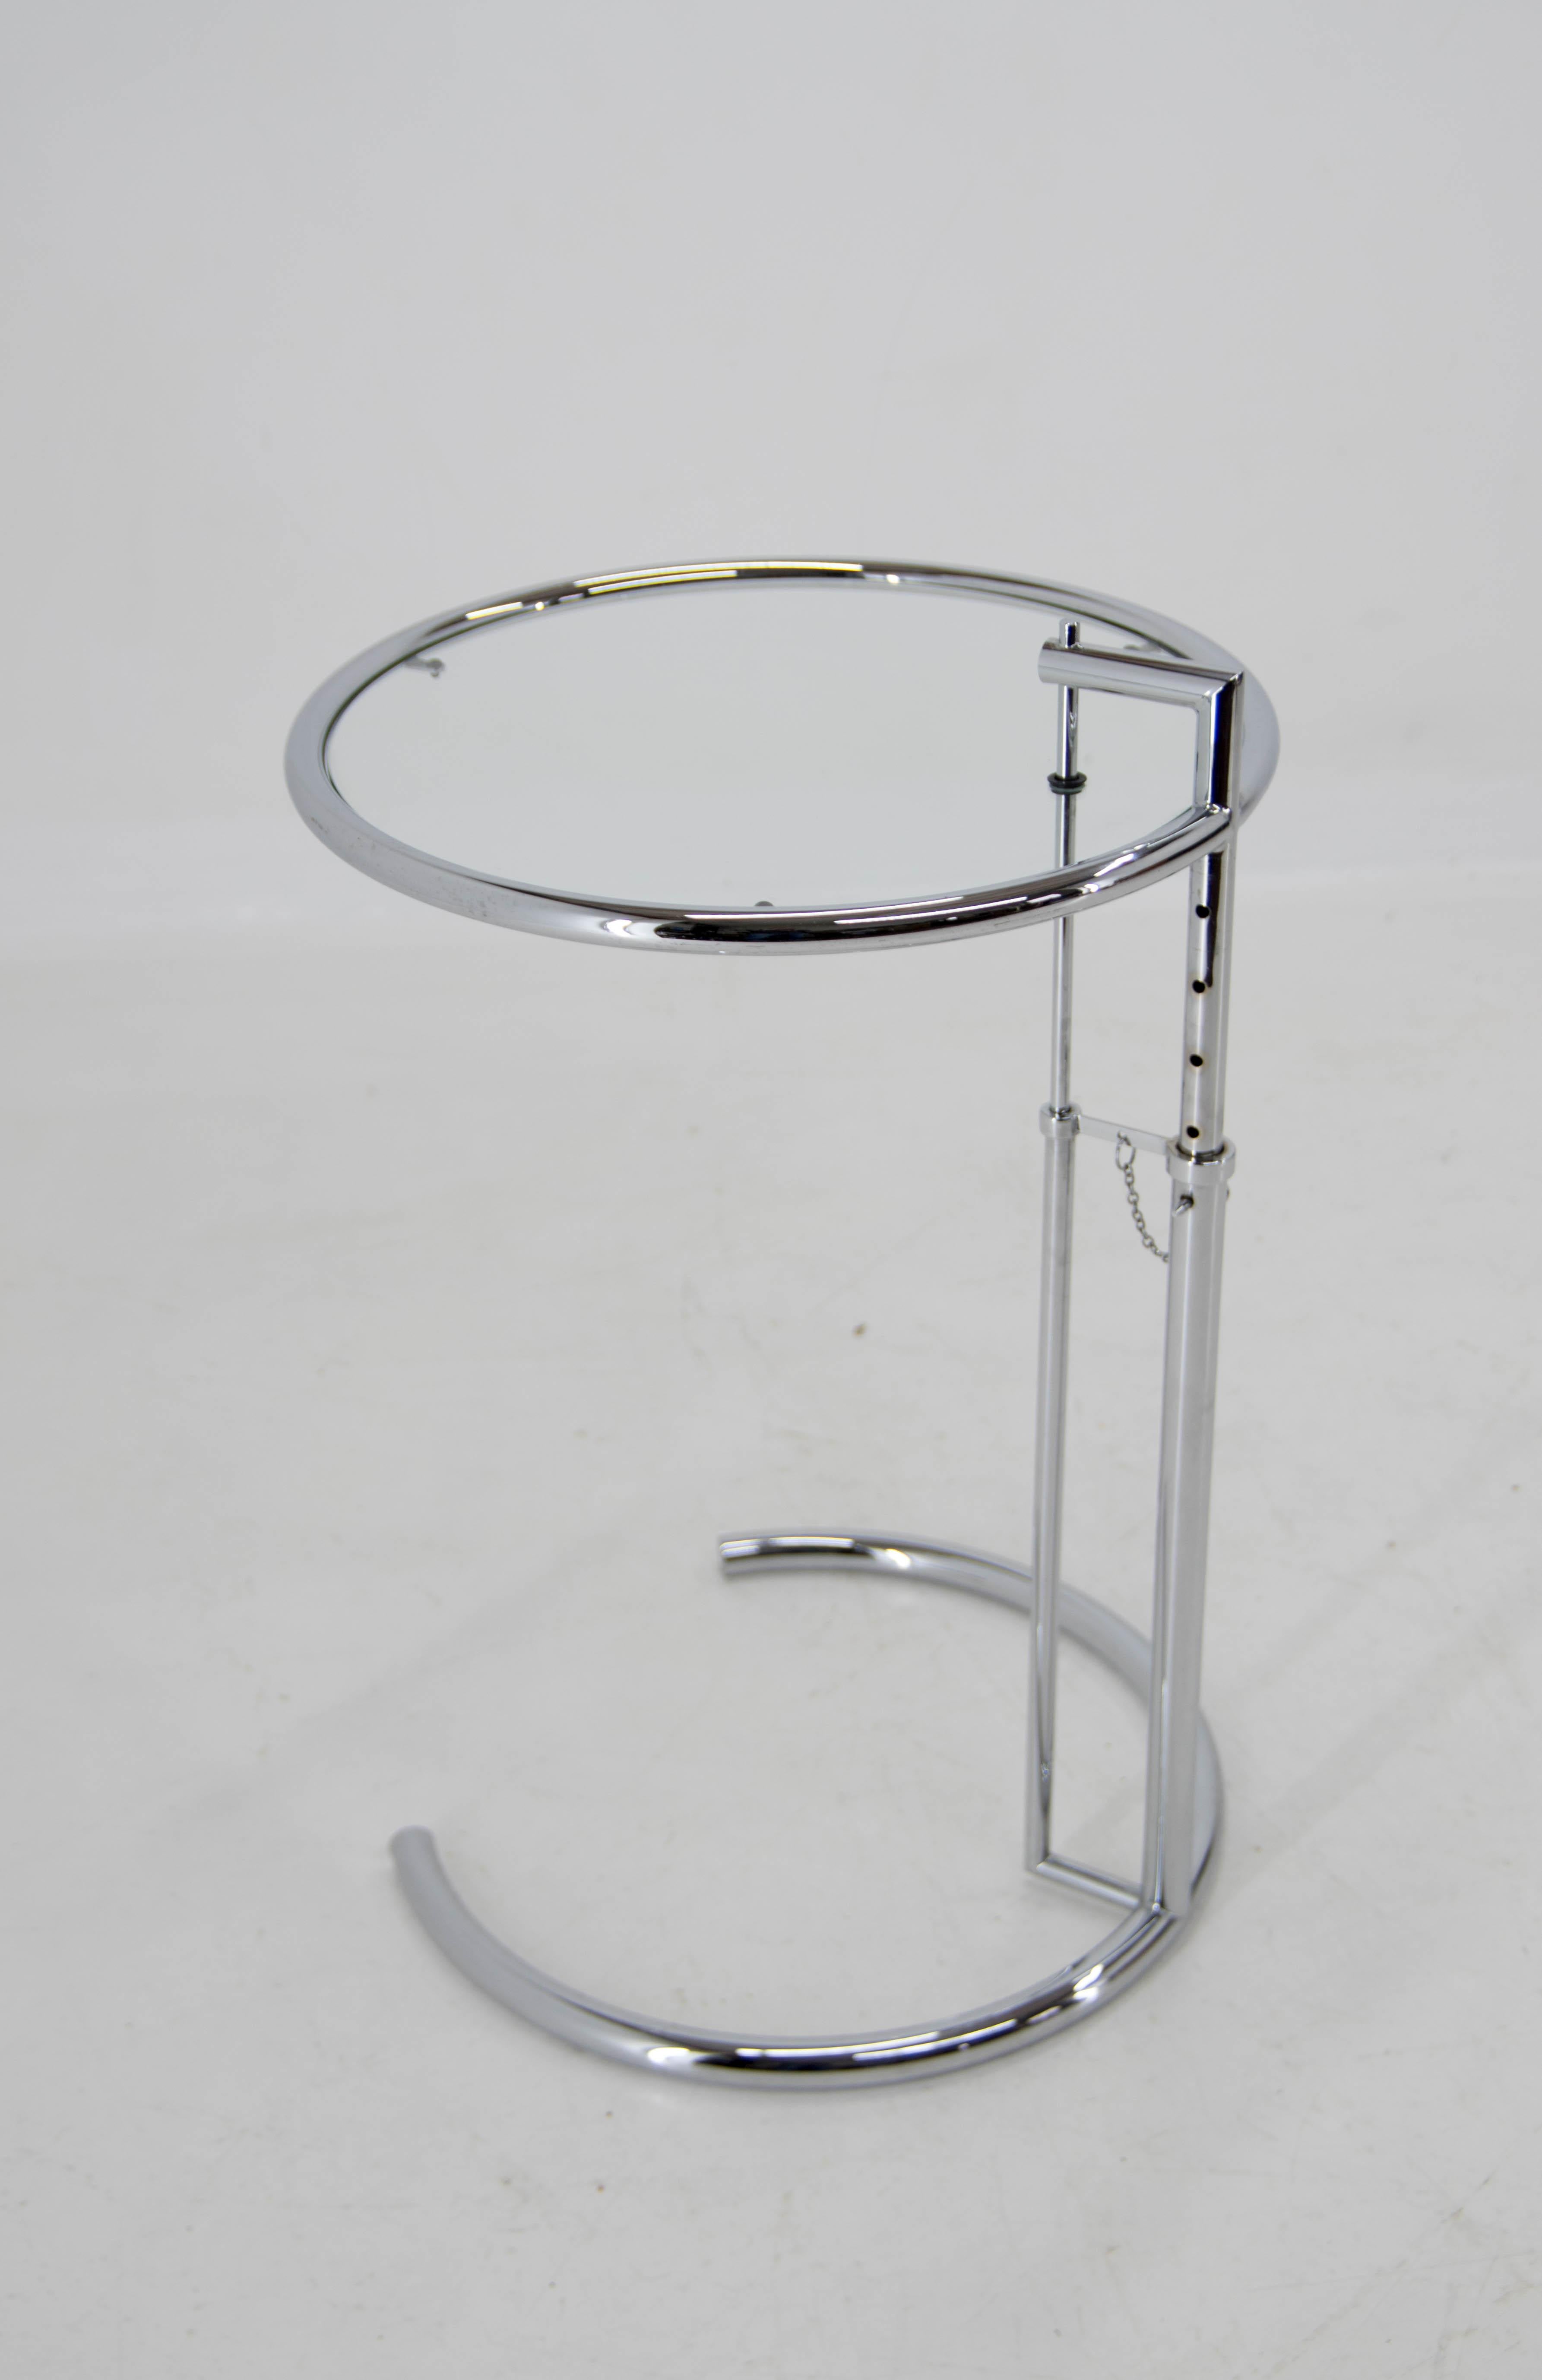 Bauhaus Adjustable Table E 1027 in Chrome and Crystal by Eileen Gray